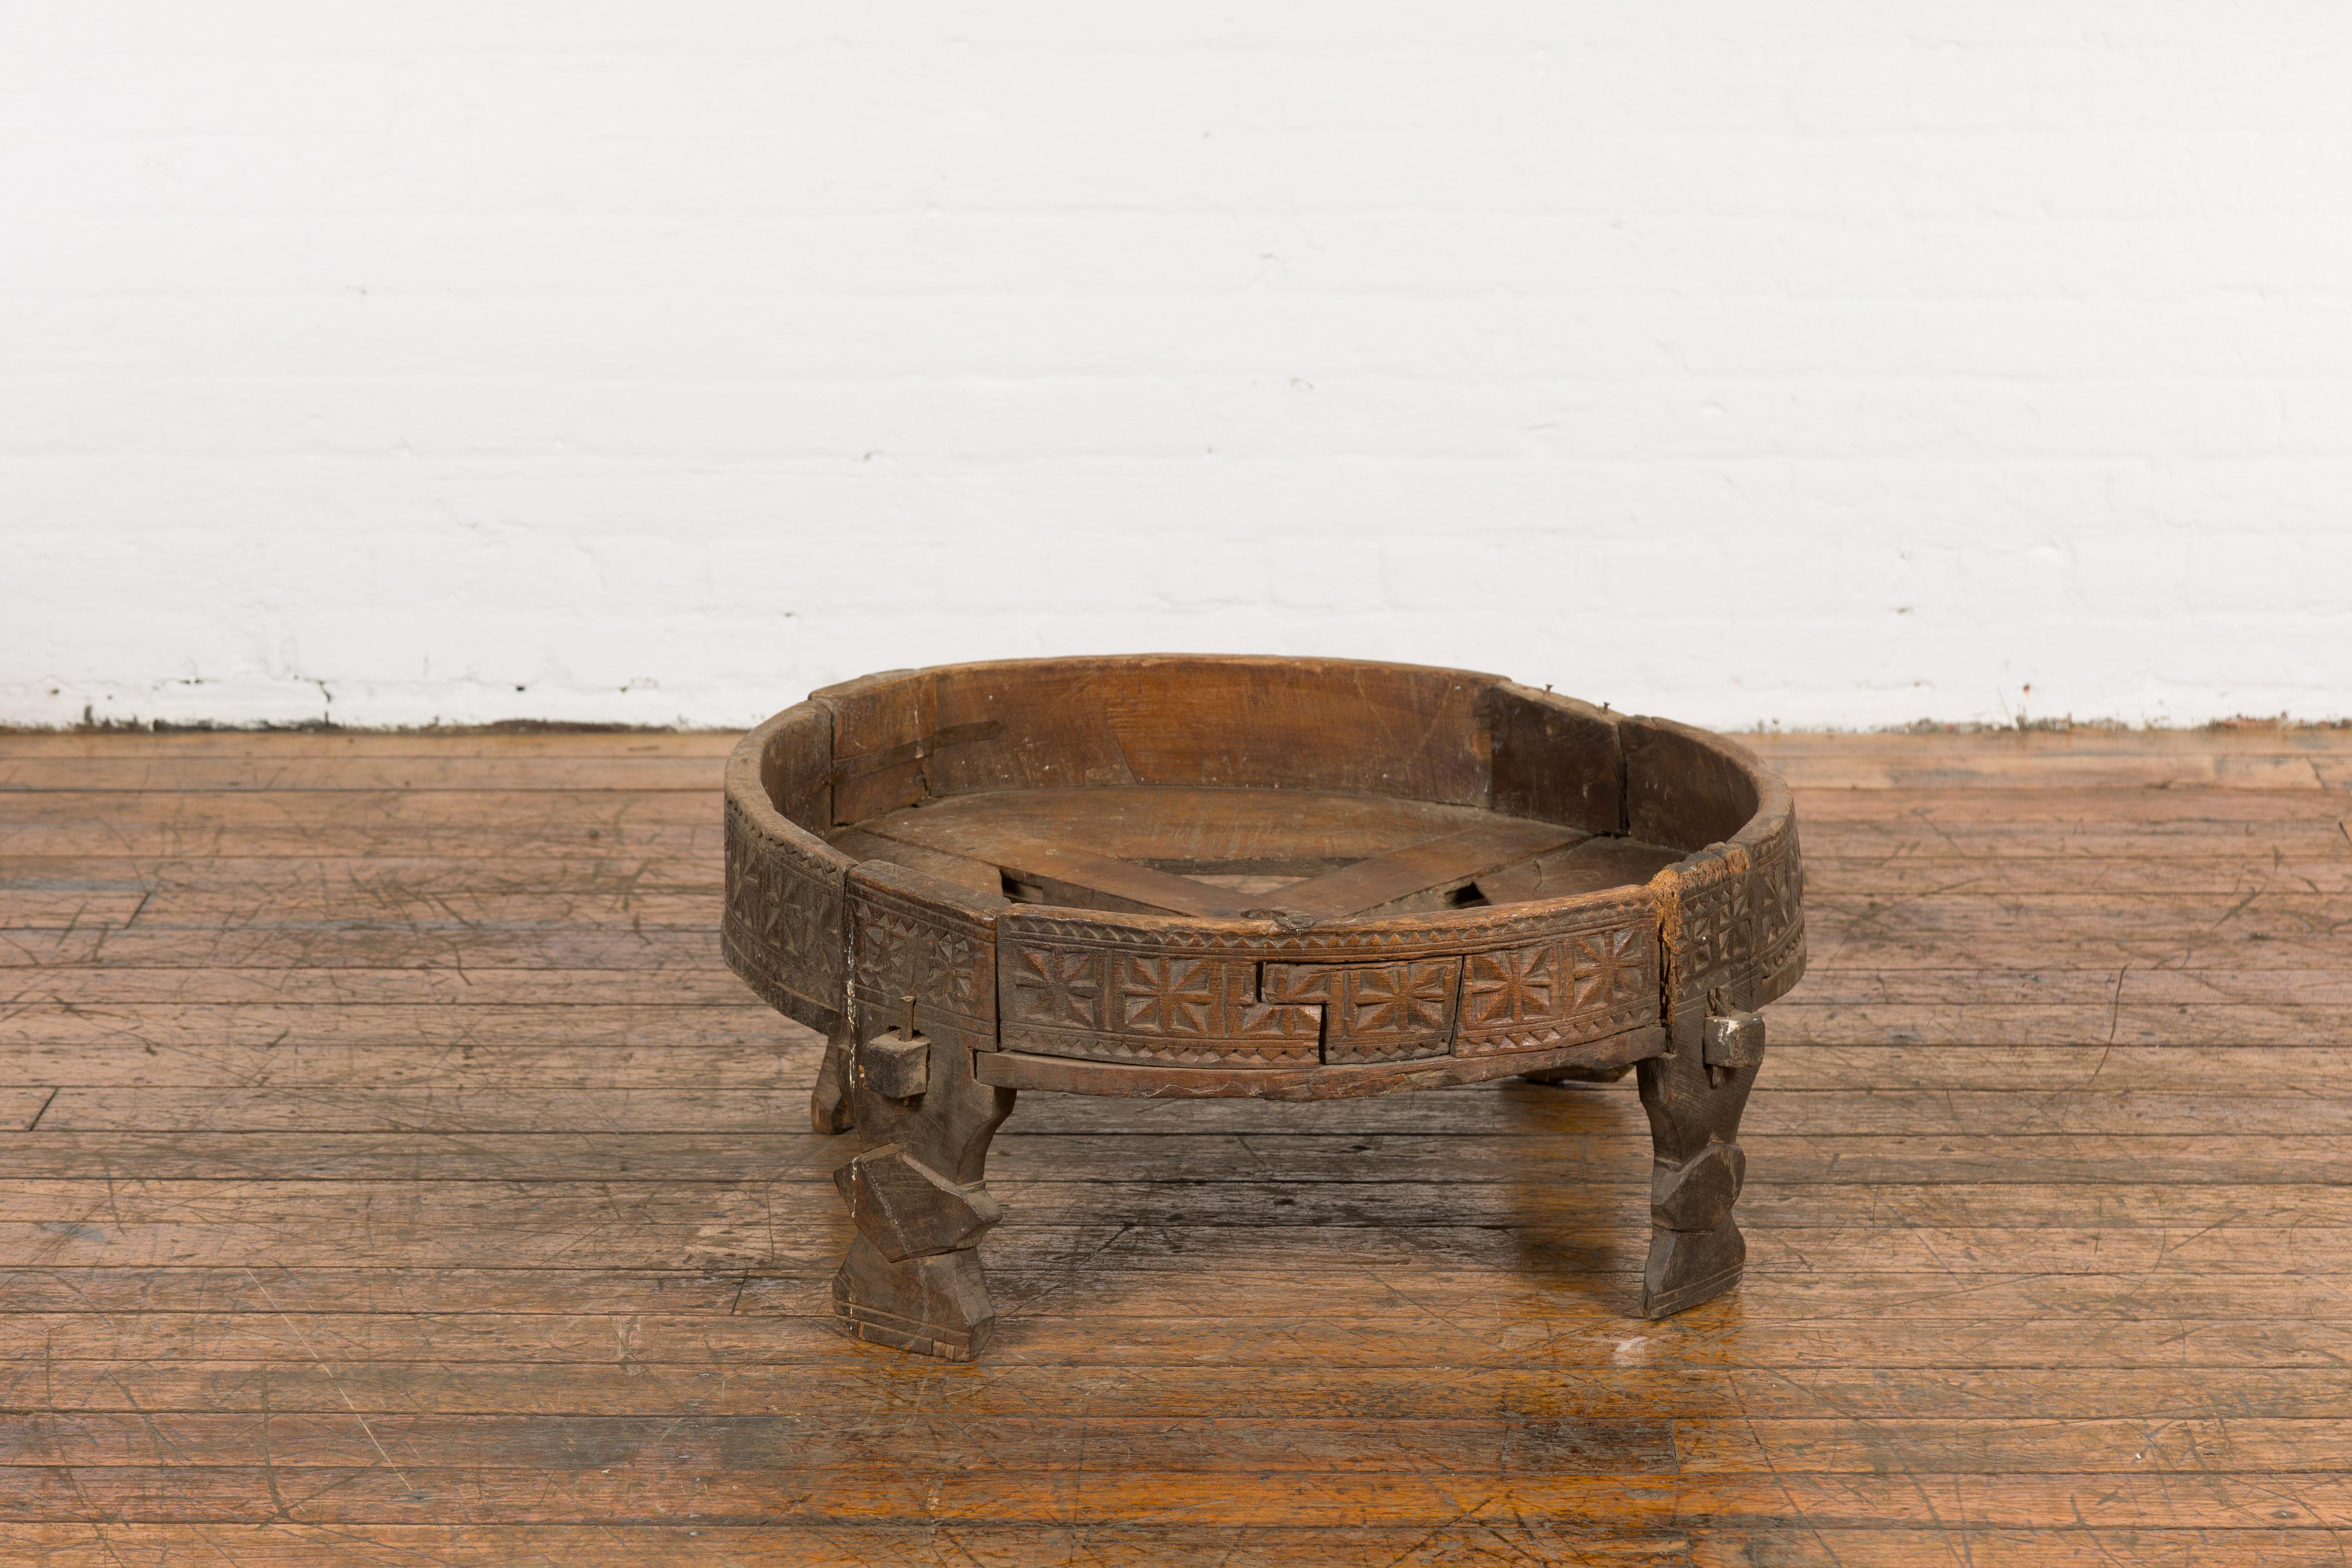 A Tribal Indian rustic Chakki grinder table from the early 20th century with hand-carved geometric motifs, open center, carved feet and weathered patina. Created in India during the early years of the 20th century, this grinder table is called a